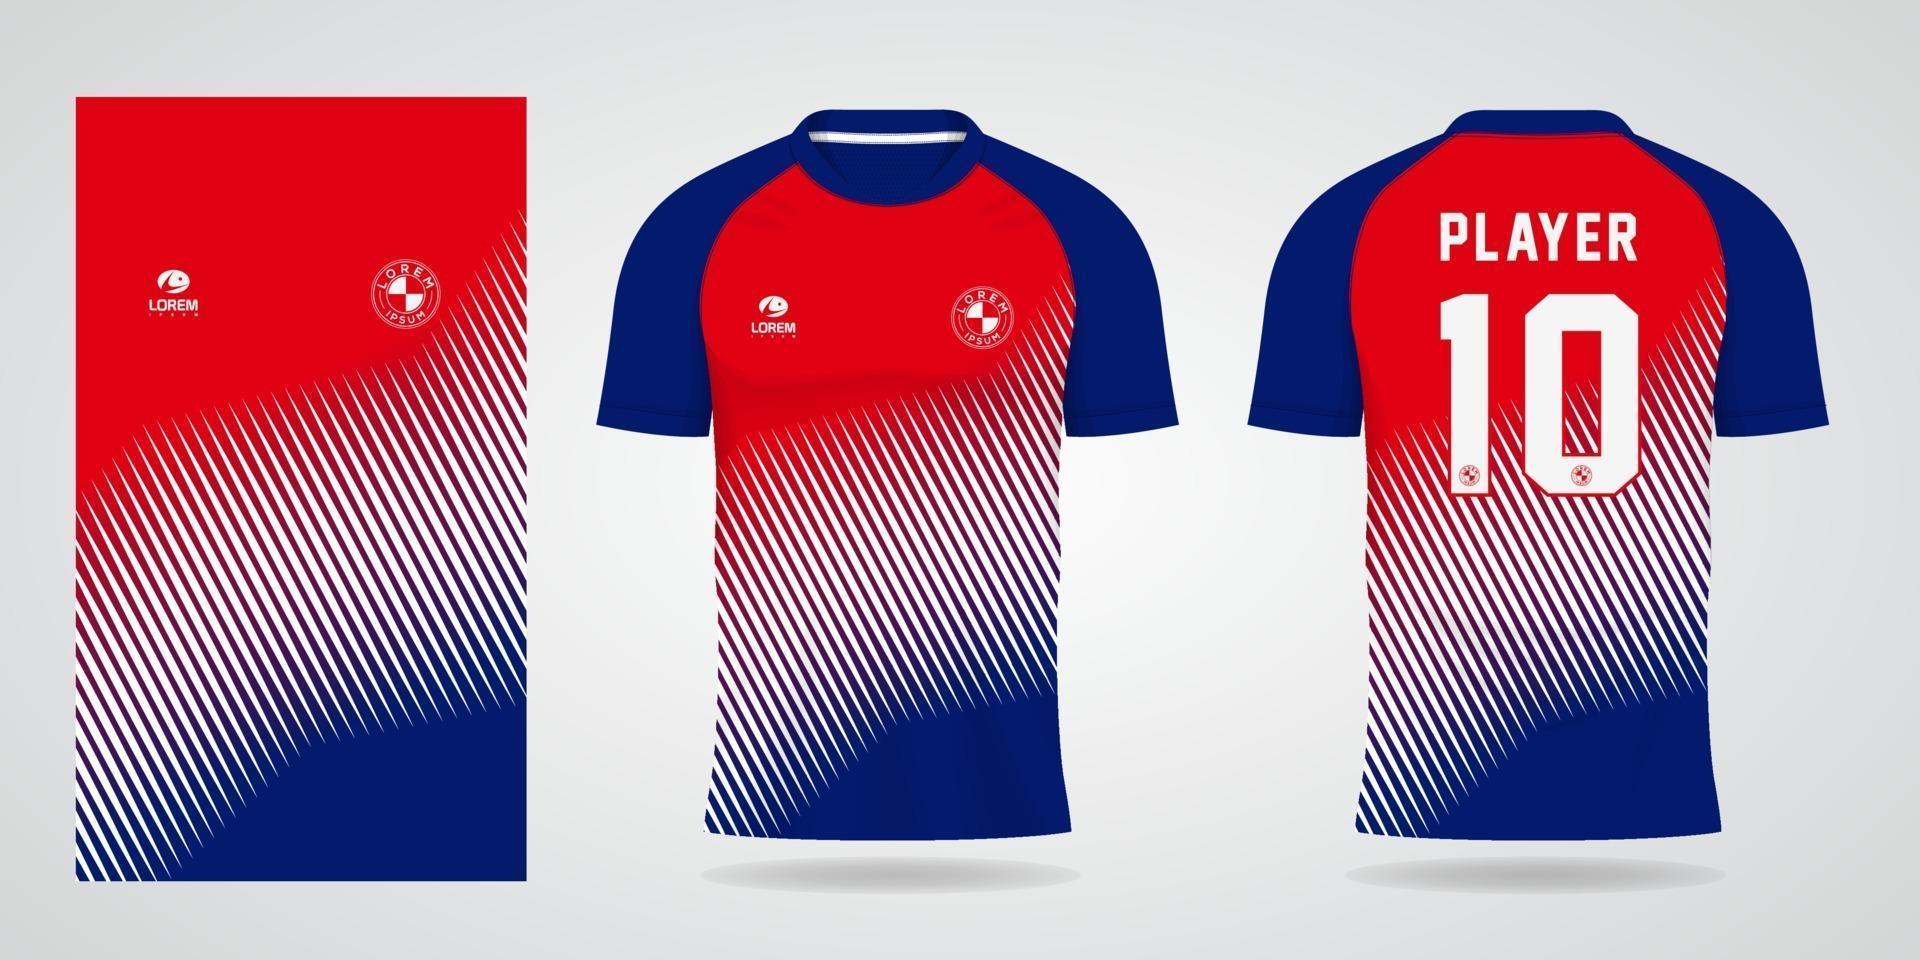 red white blue jersey template for team uniforms and Soccer t shirt vector